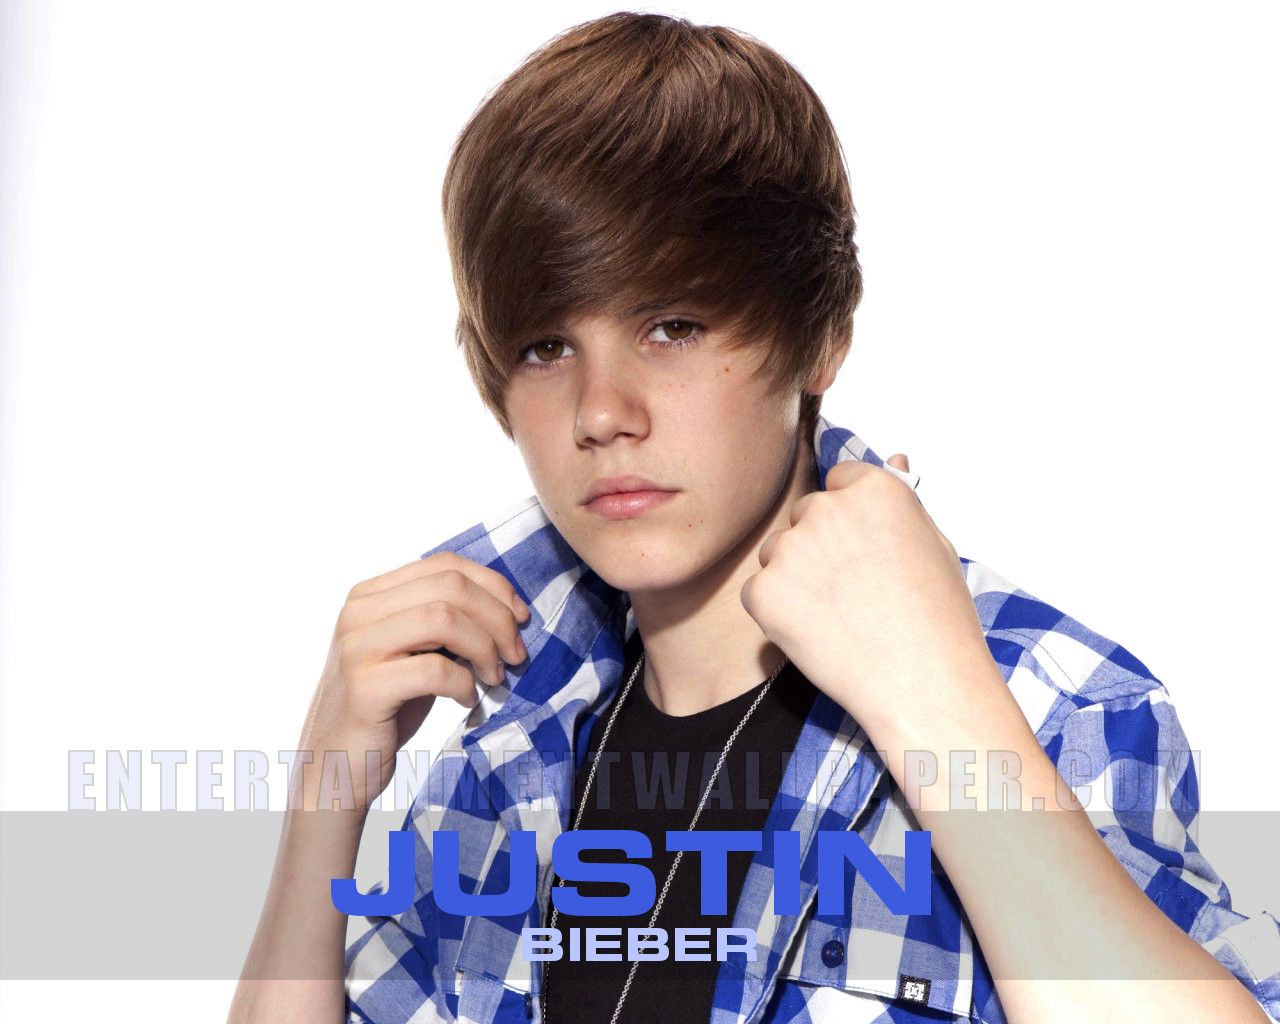 Hdq Images, Justin Bieber - Justin Bieber New Look Hairstyle - 1280x1024  Wallpaper 